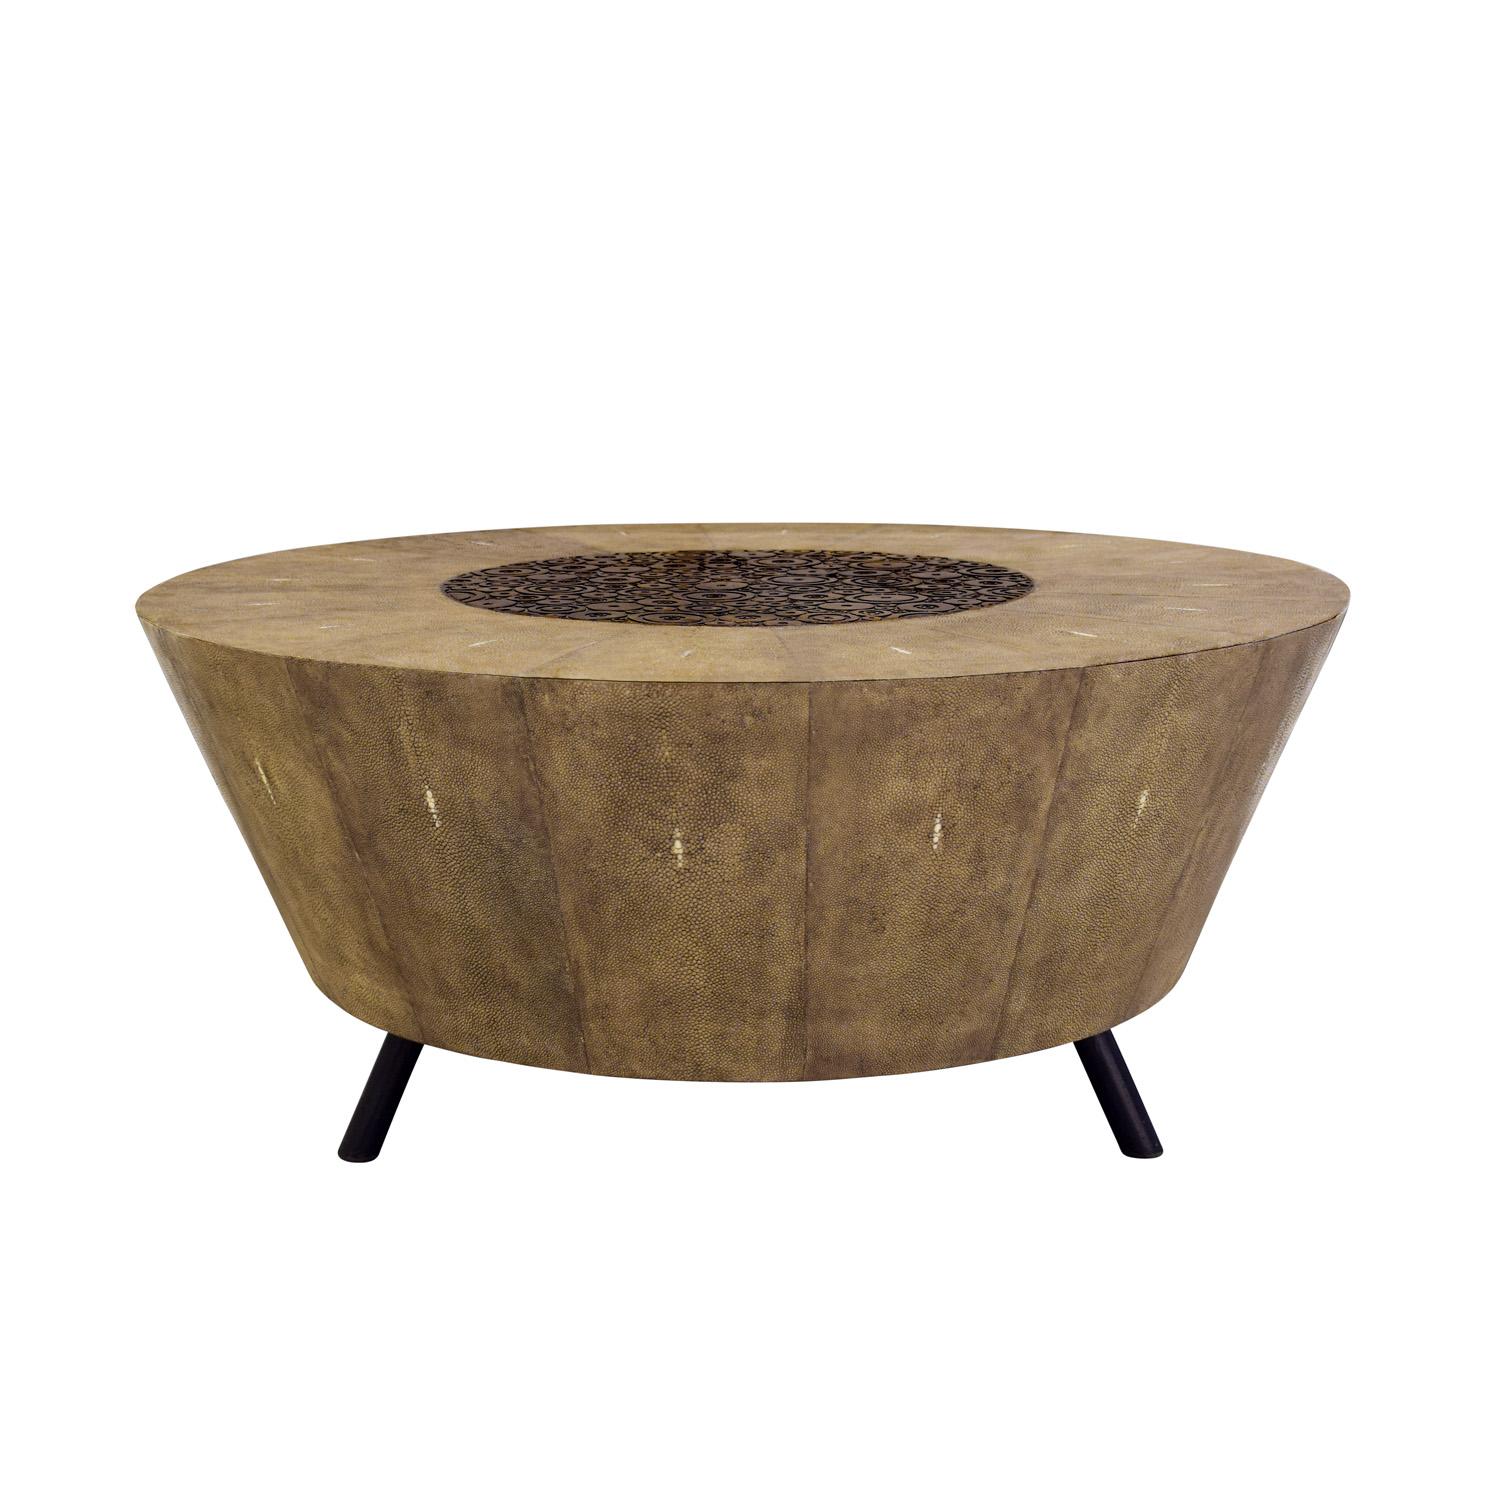 R & Y Augousti Coffee Table in Shagreen and Bronze, 2010 'Signed'